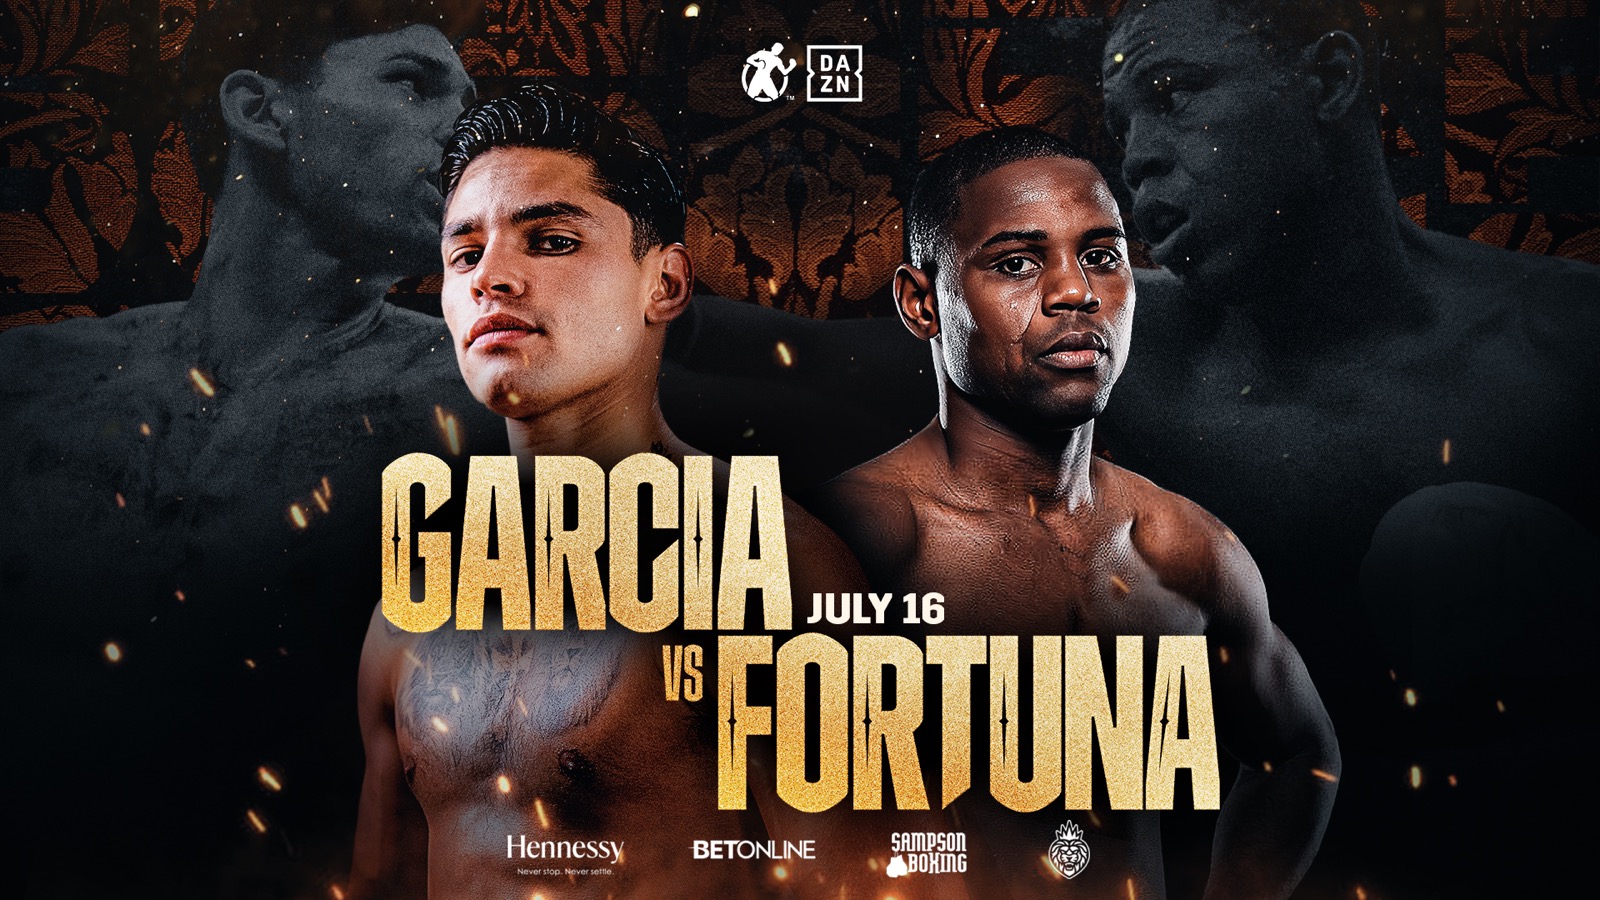 Image: Ryan Garcia's talent will show "once he gets tested" says Andy Ruiz